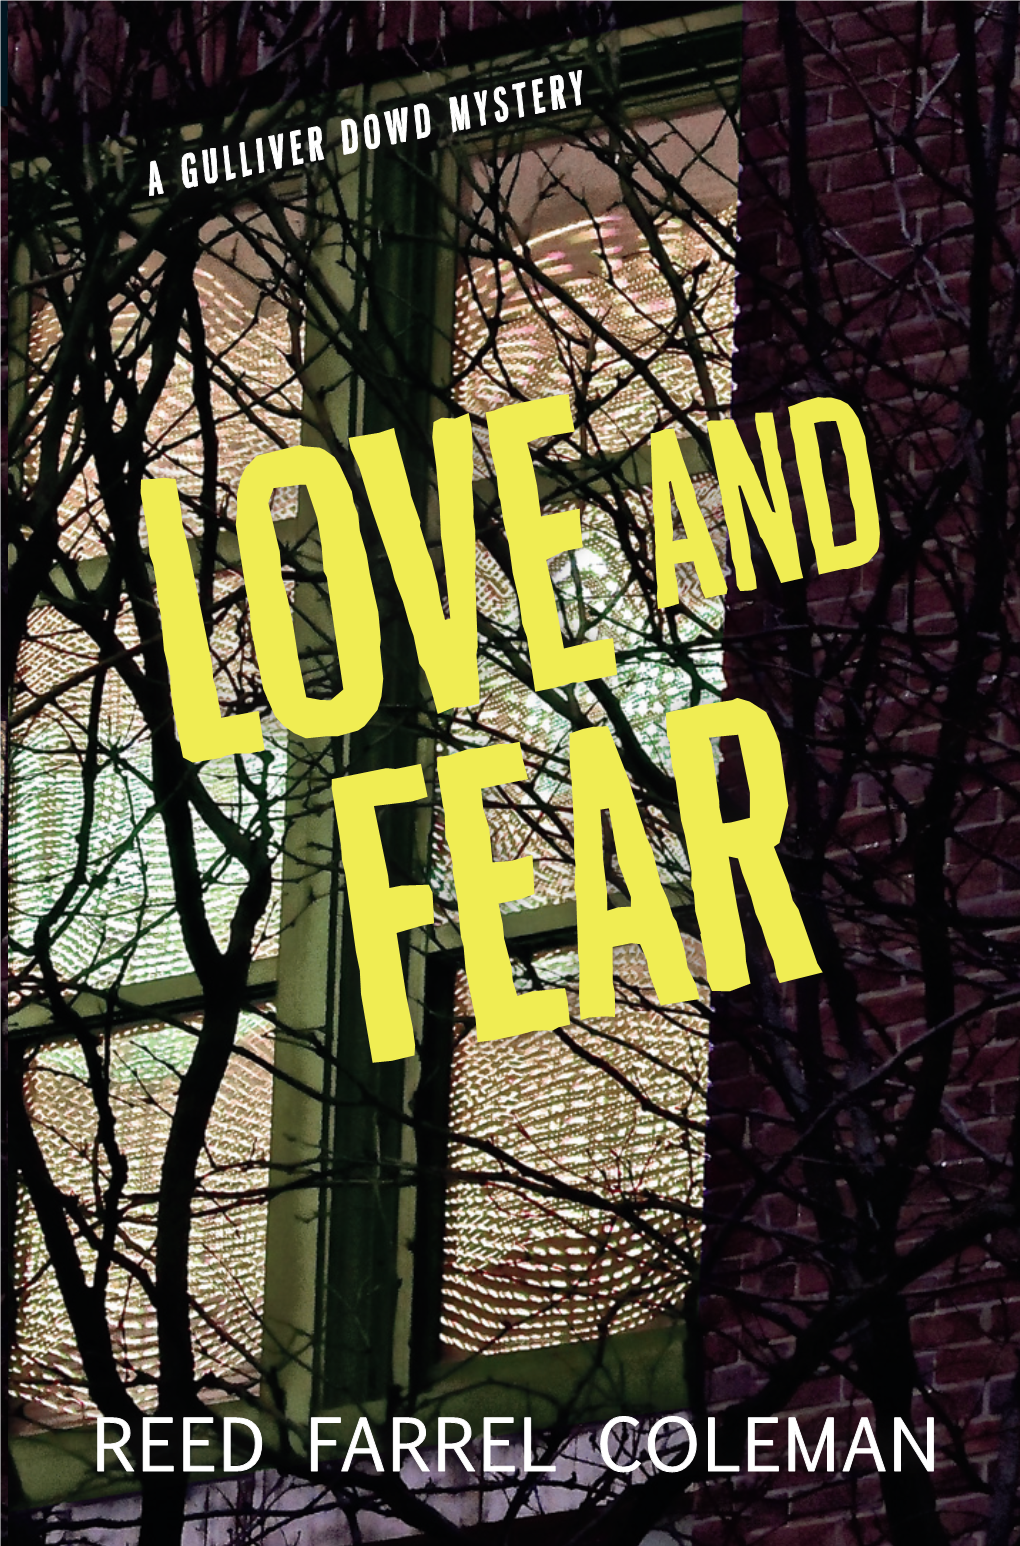 Reed Farrel Coleman Love and Fear Love and Fear Reed Farrel Coleman Copyright © 2016 Reed Farrel Coleman